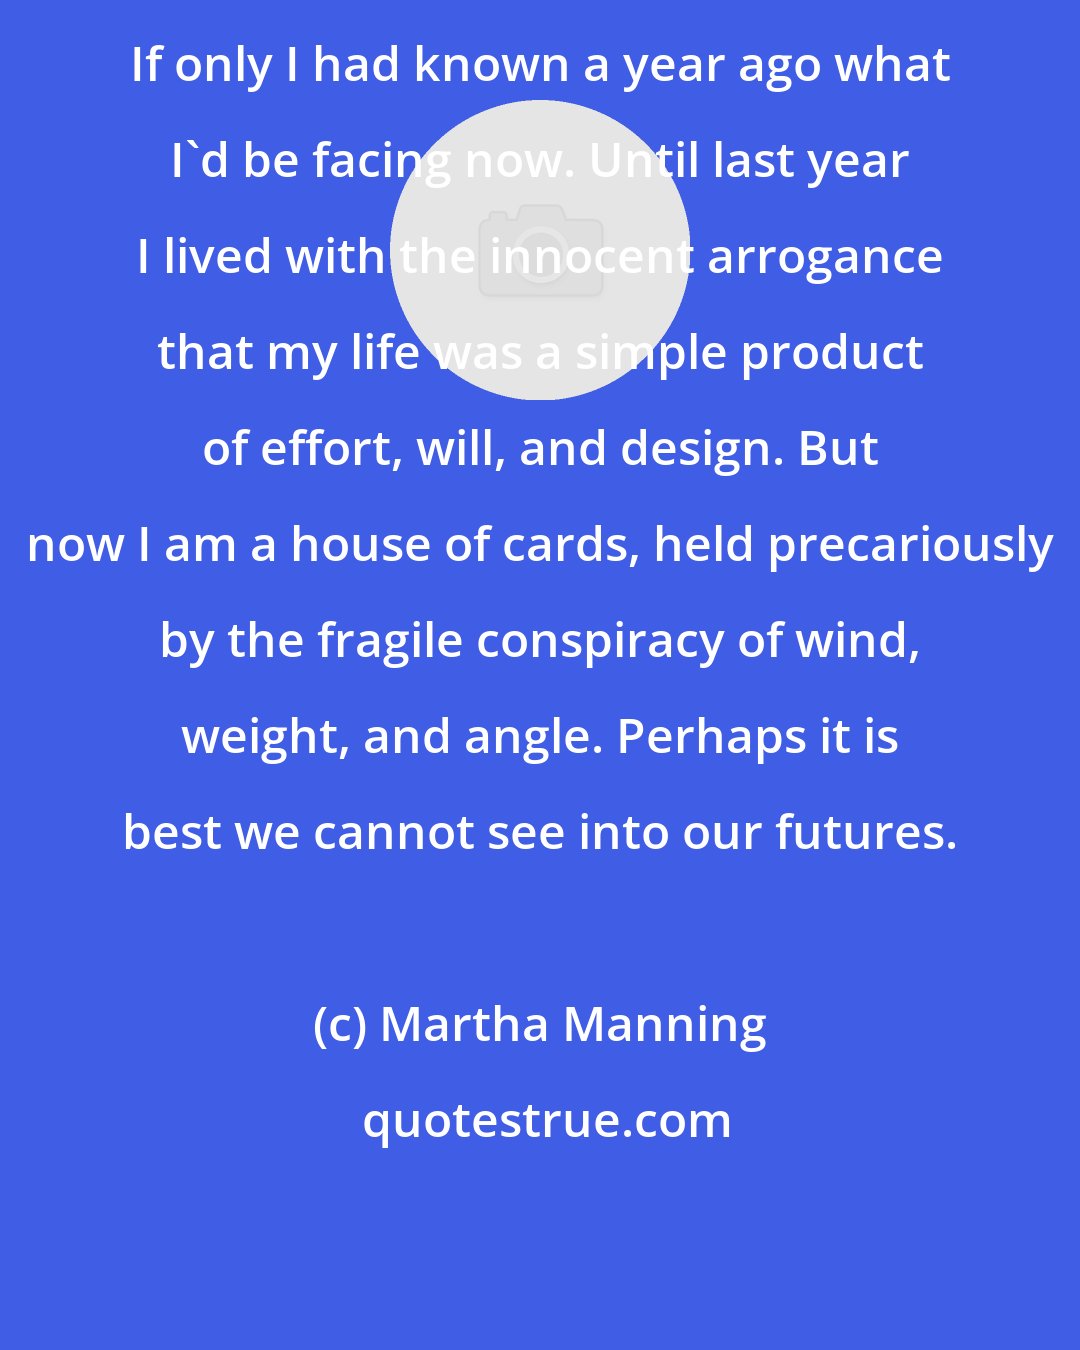 Martha Manning: If only I had known a year ago what I'd be facing now. Until last year I lived with the innocent arrogance that my life was a simple product of effort, will, and design. But now I am a house of cards, held precariously by the fragile conspiracy of wind, weight, and angle. Perhaps it is best we cannot see into our futures.